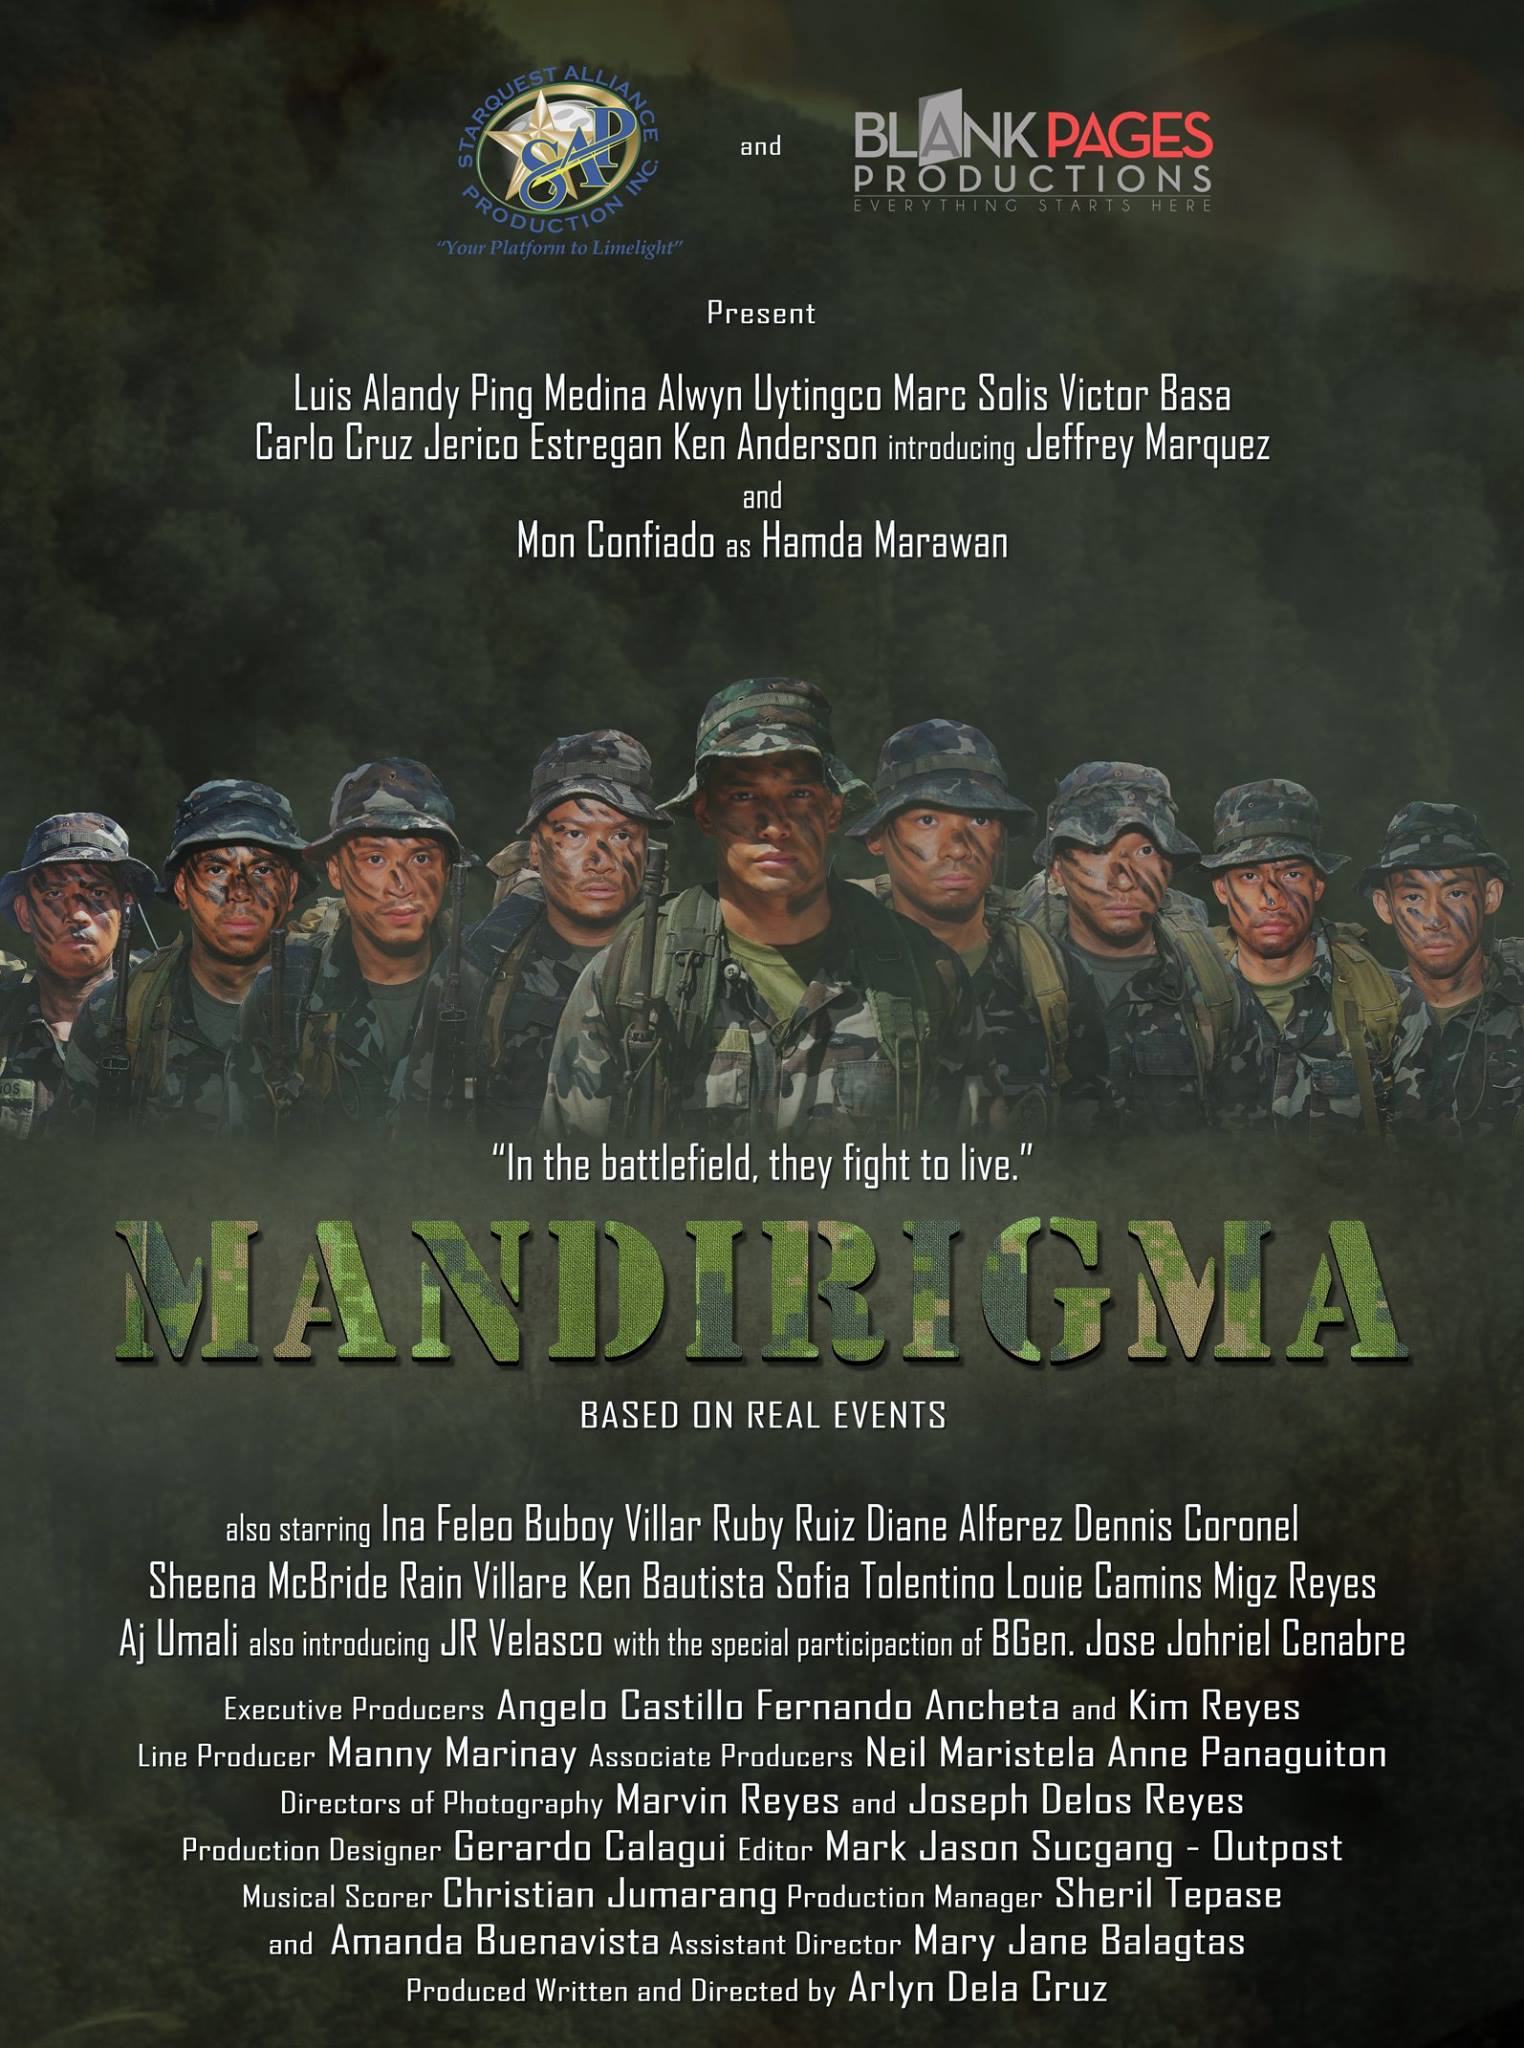 Dela Cruz Arlyn August 4 ·   PUSH PA MORE: #MANDIRIGMA's first: Special Screening on the 13th of August, 2015 at the Cinema 1 of SM Aura. Screening starts at 7 in the evening. Tickets can be directly purchased at Cinema 1 on the day itself. Our production staff will be there as early as 4 in the afternoon. SM Aura rate is P270.00 per ticket. Please call Gen Sarabia for ticket reservation at 0917-620-2325.